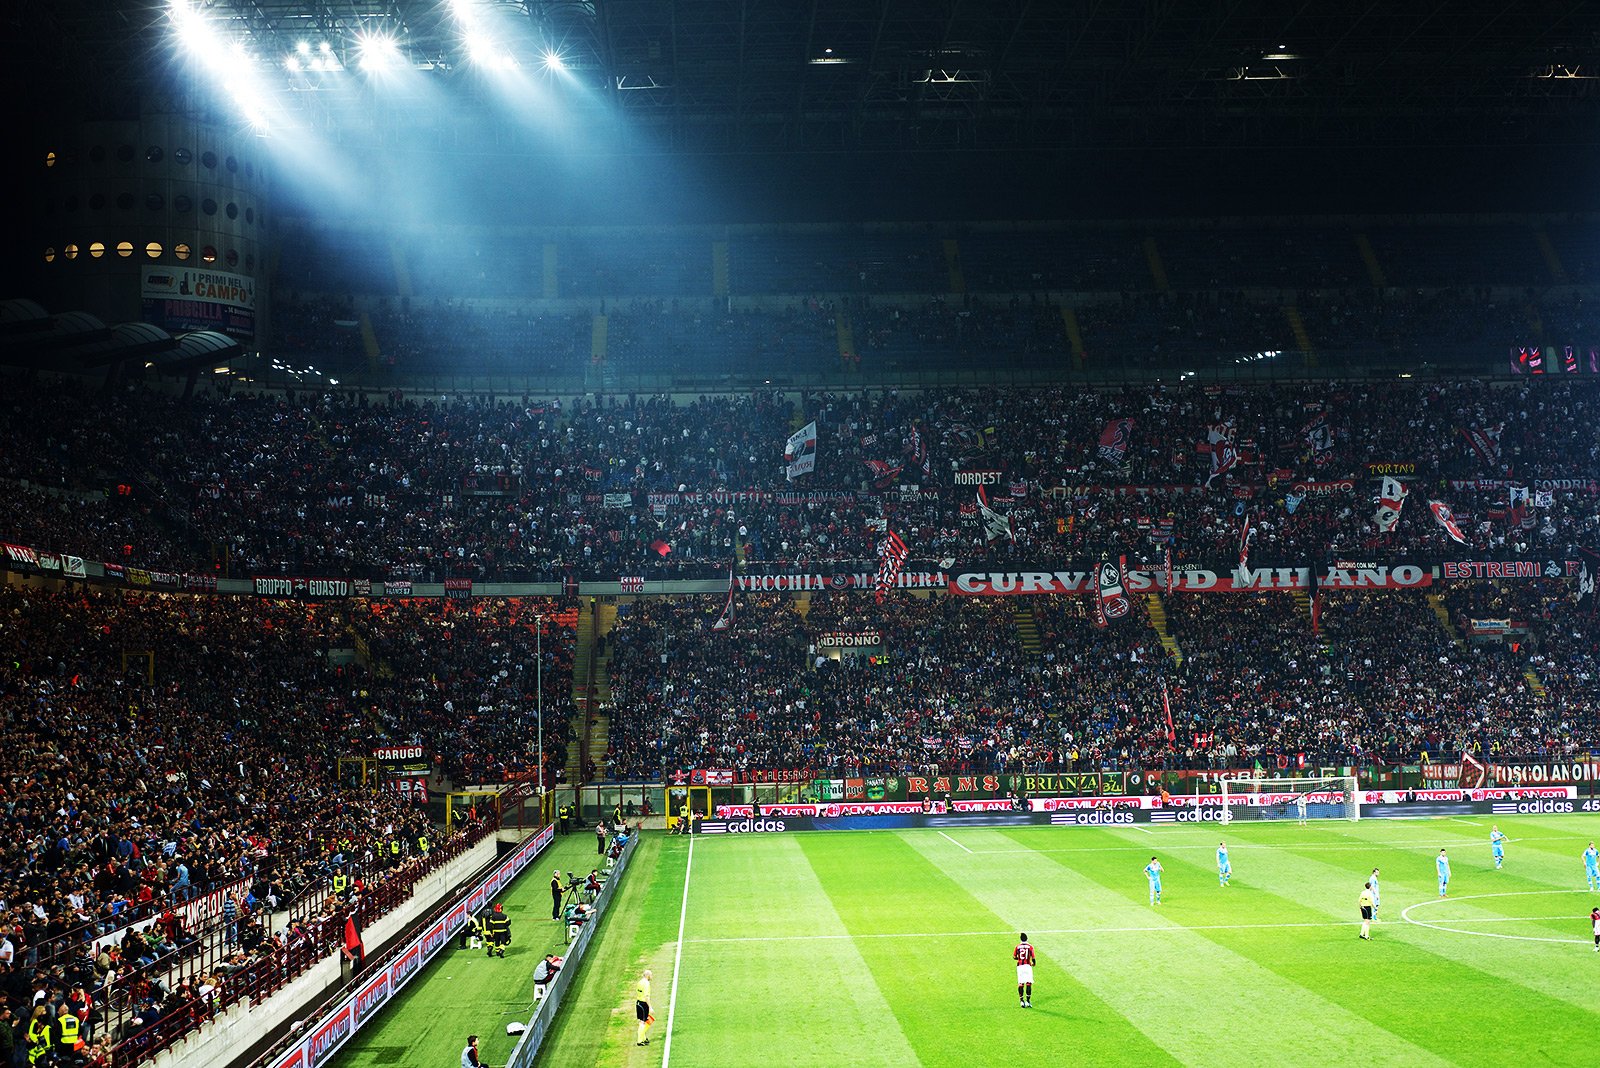 How to watch football at the San Siro stadium in Milan